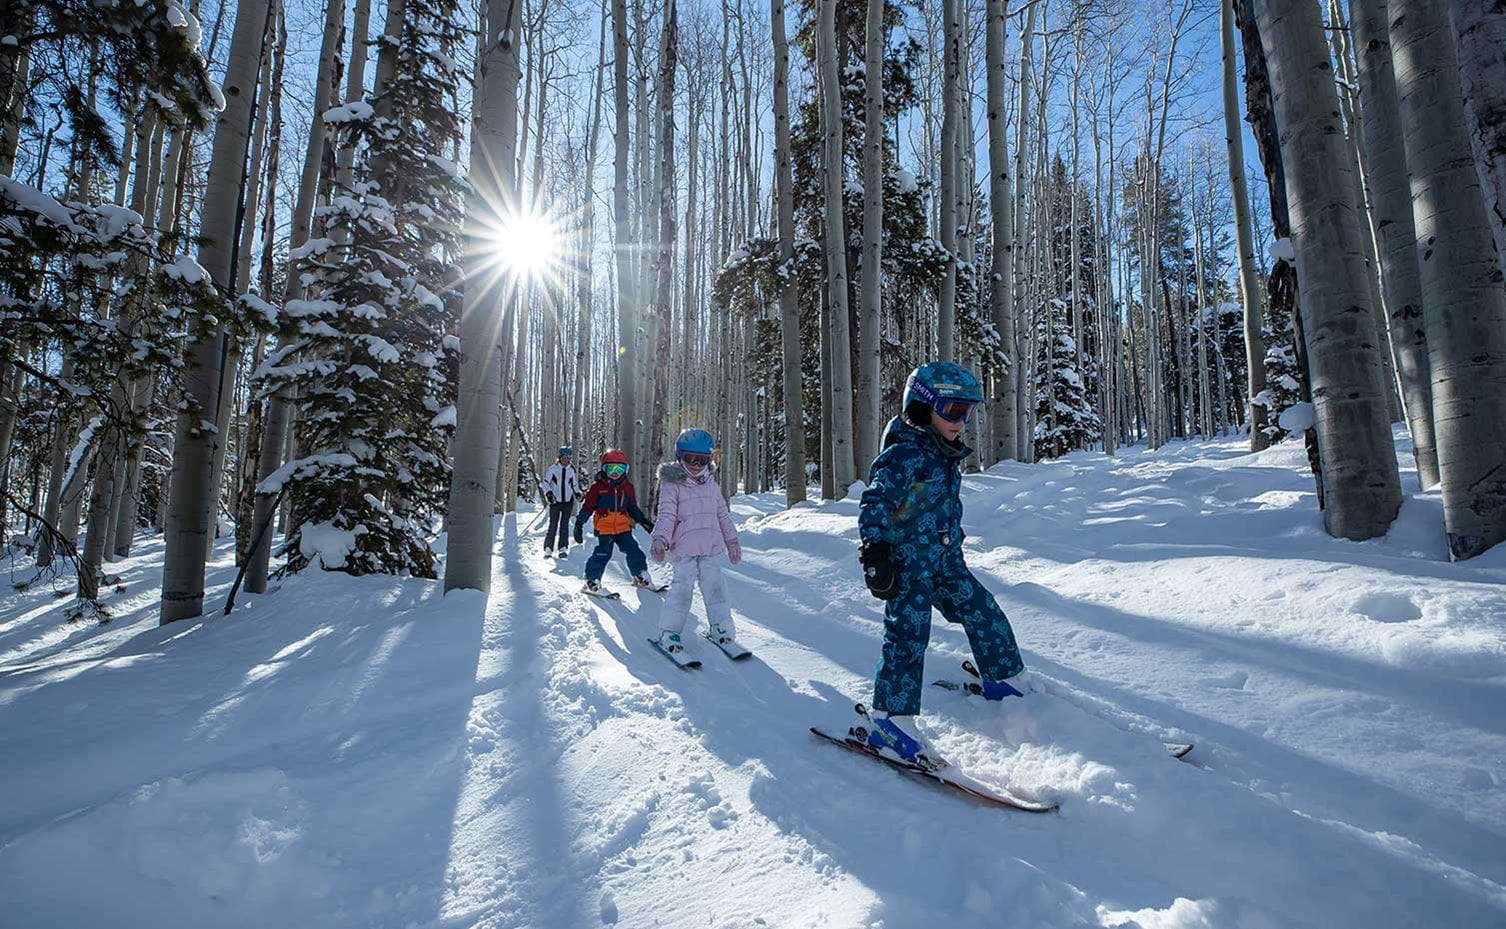 Kids skiing through the trees at Snowmass, Colorado